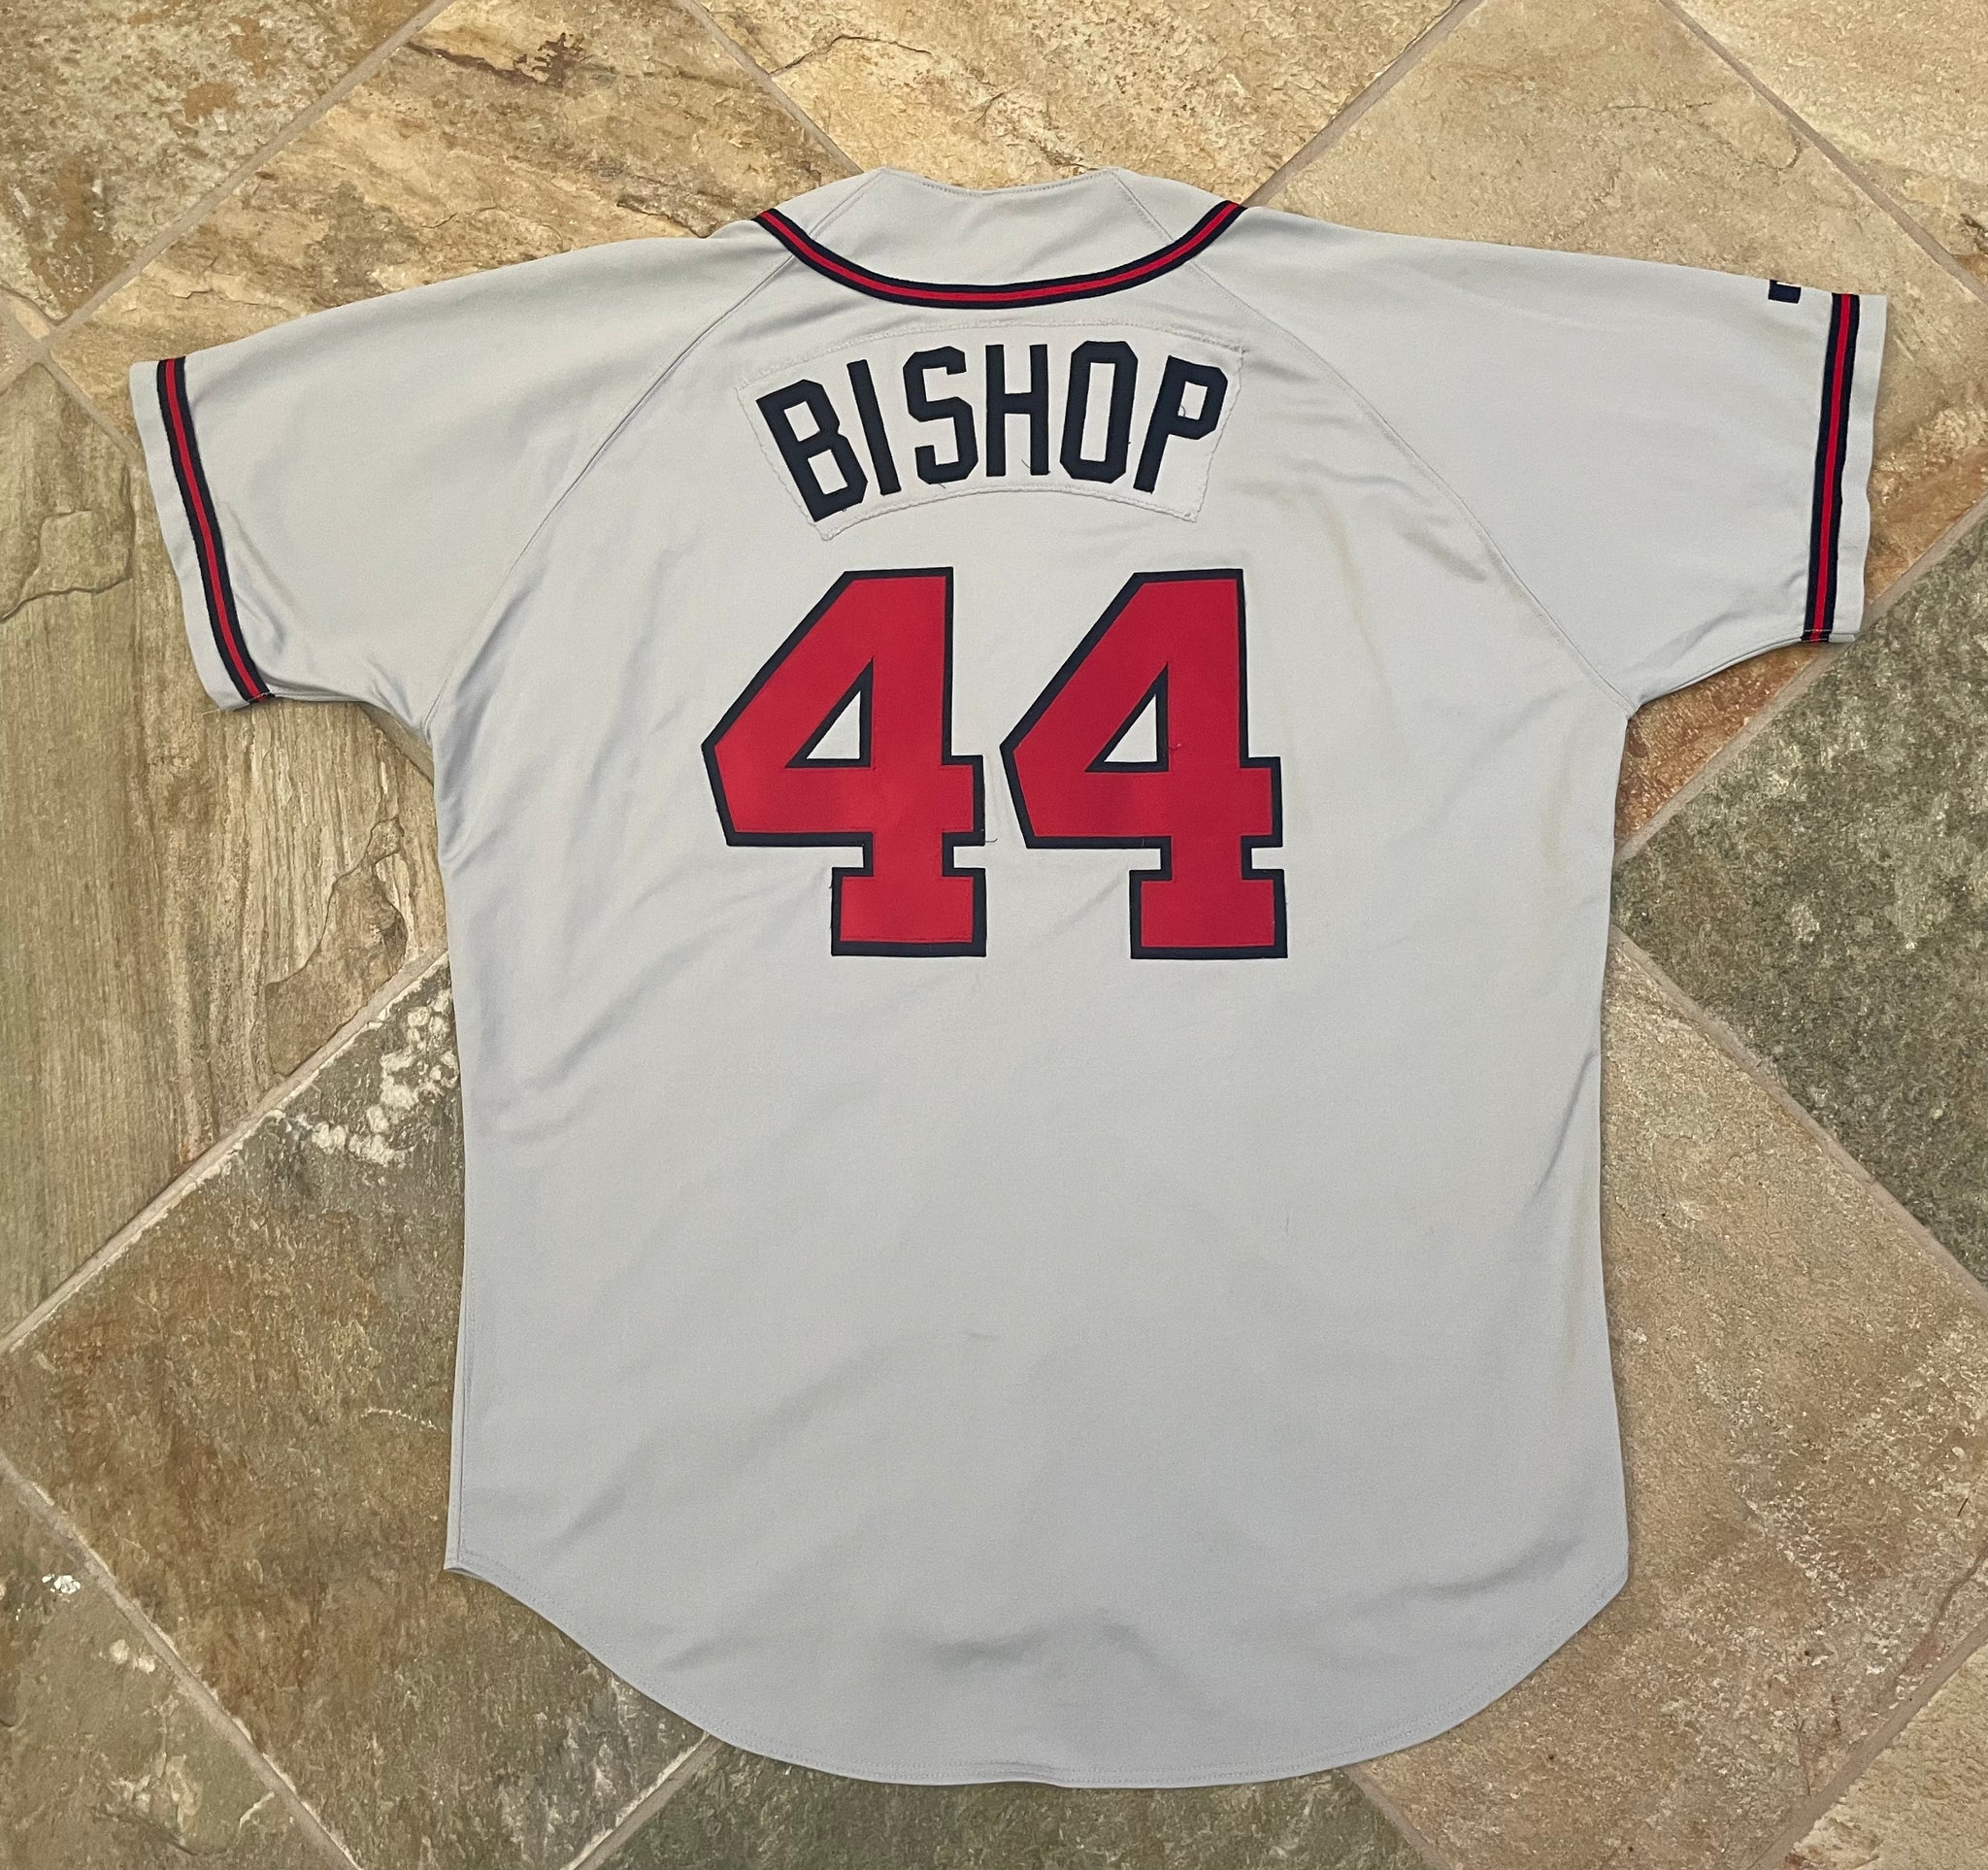 Rare Vintage Authentic mid 1990s ATLANTA BRAVES jersey - RUSSELL size 48